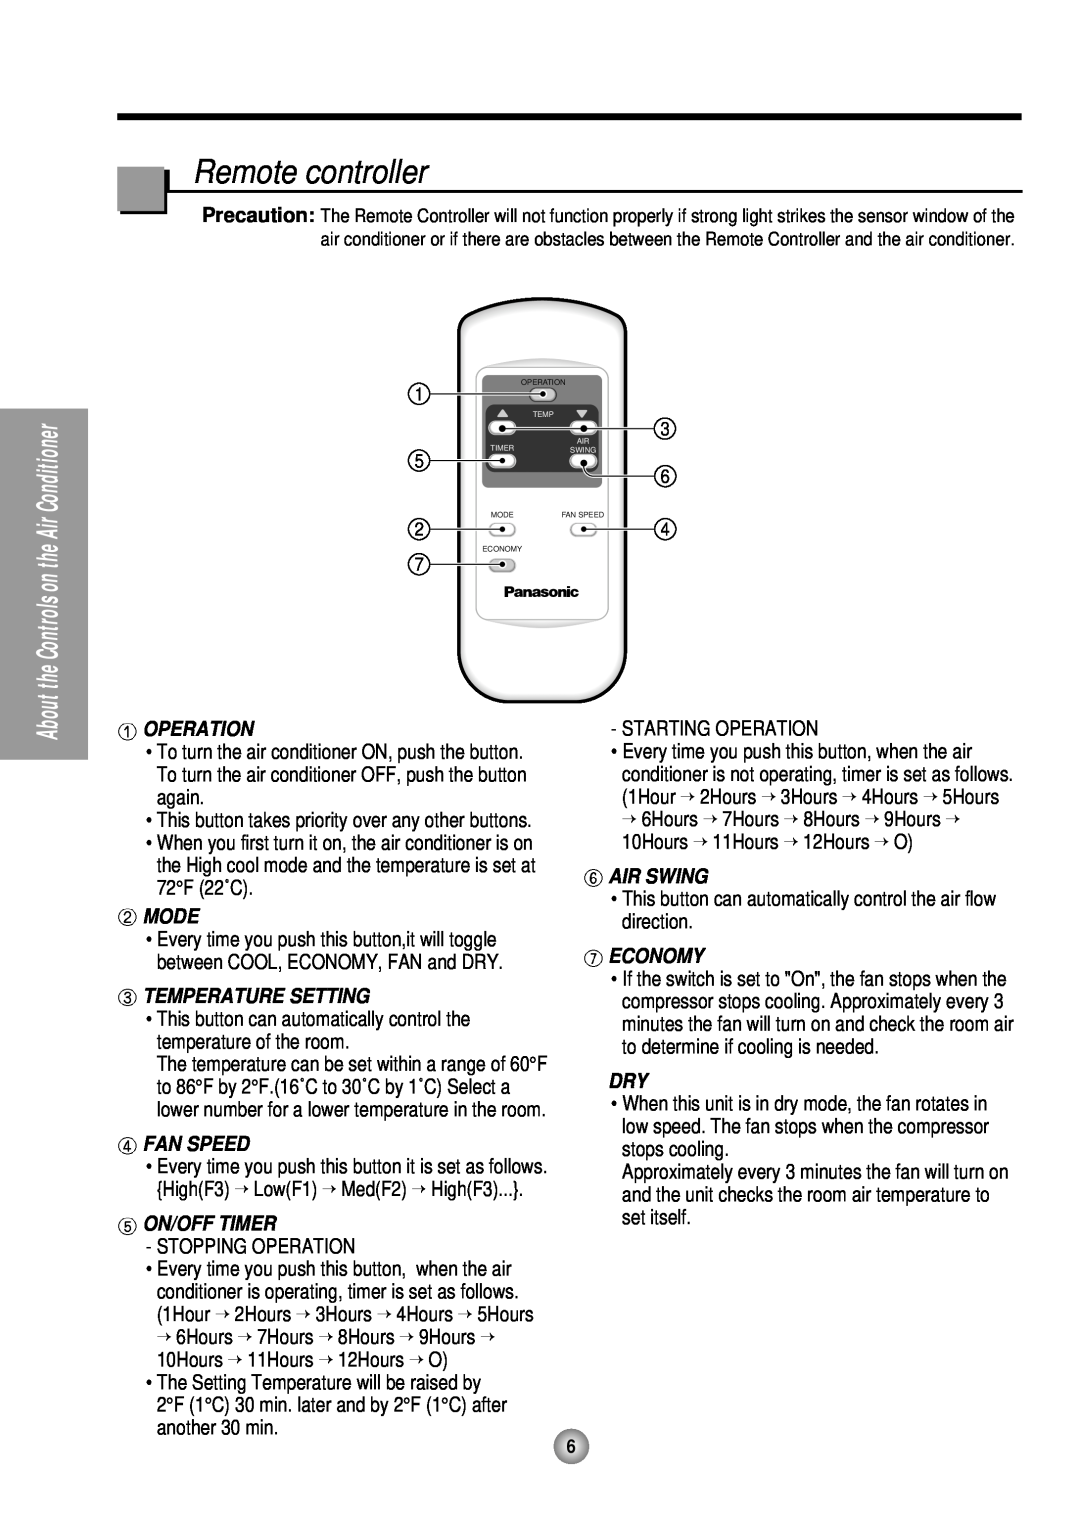 Panasonic CW-XC145HU Remote controller, Operation, Mode, Temperature Setting, Fan Speed, On/Off Timer, Air Swing, Economy 